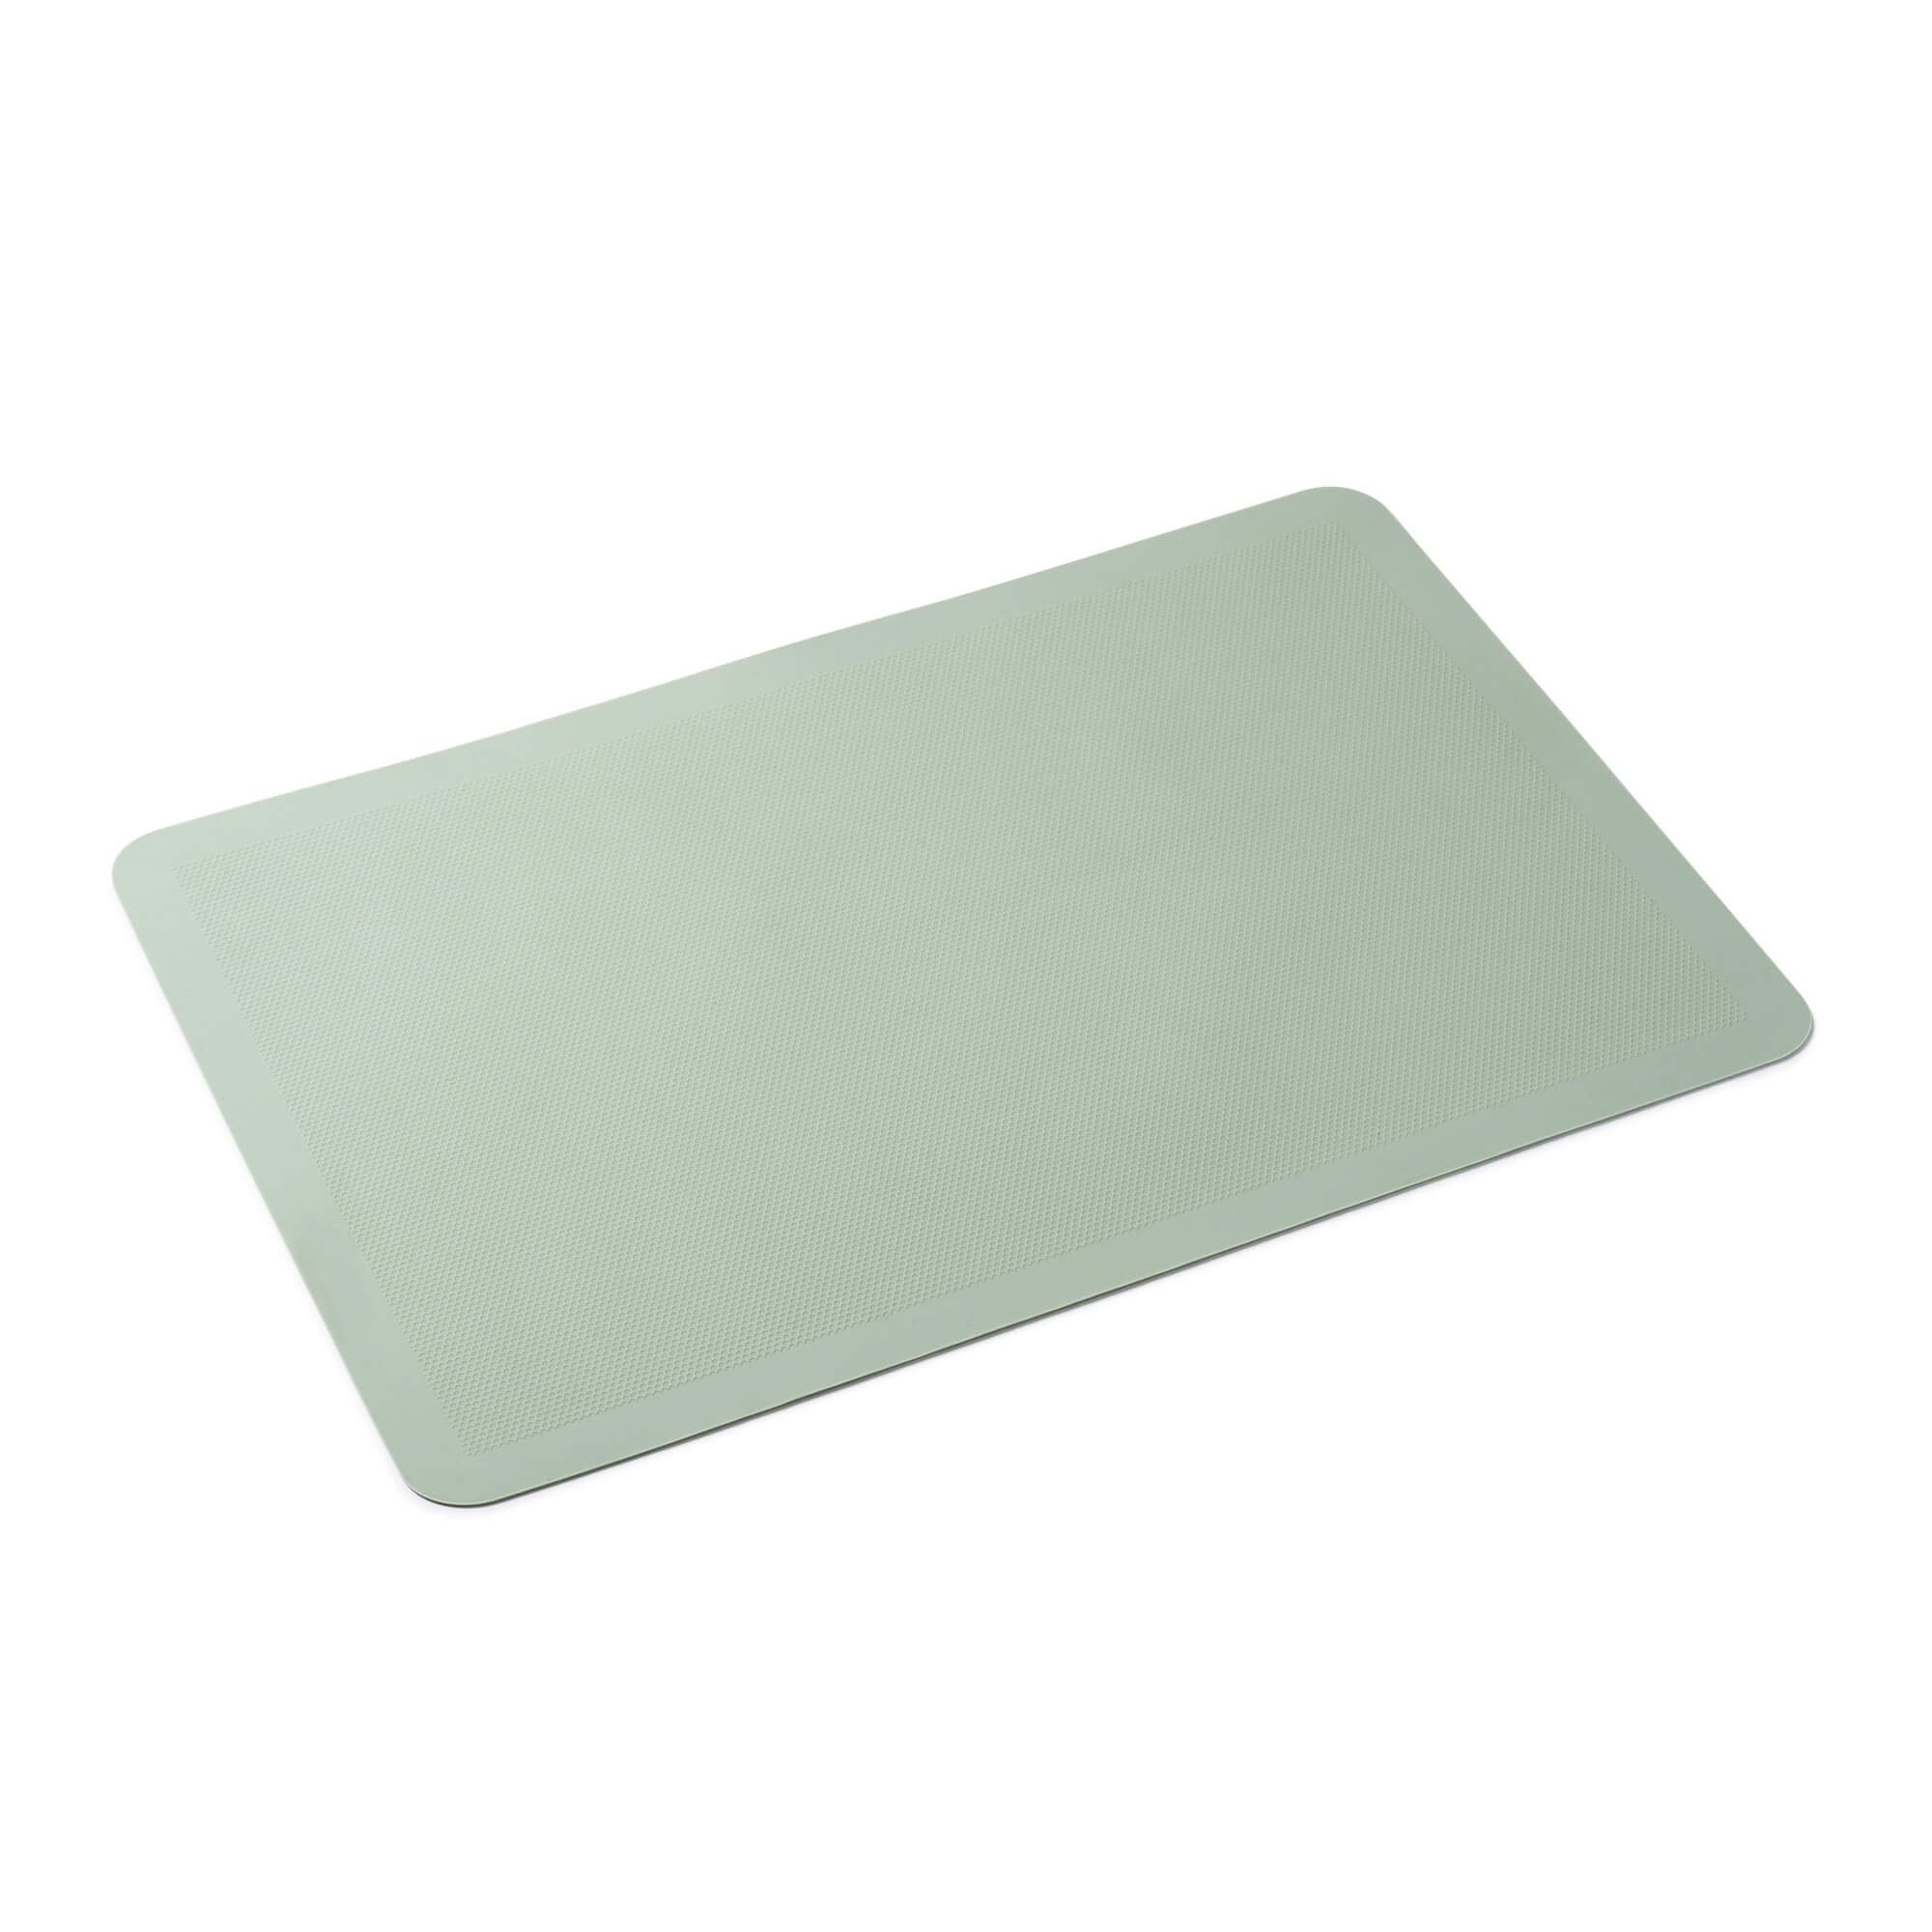 Zeal Non Stick Silicone Baking Sheet in Sage Green